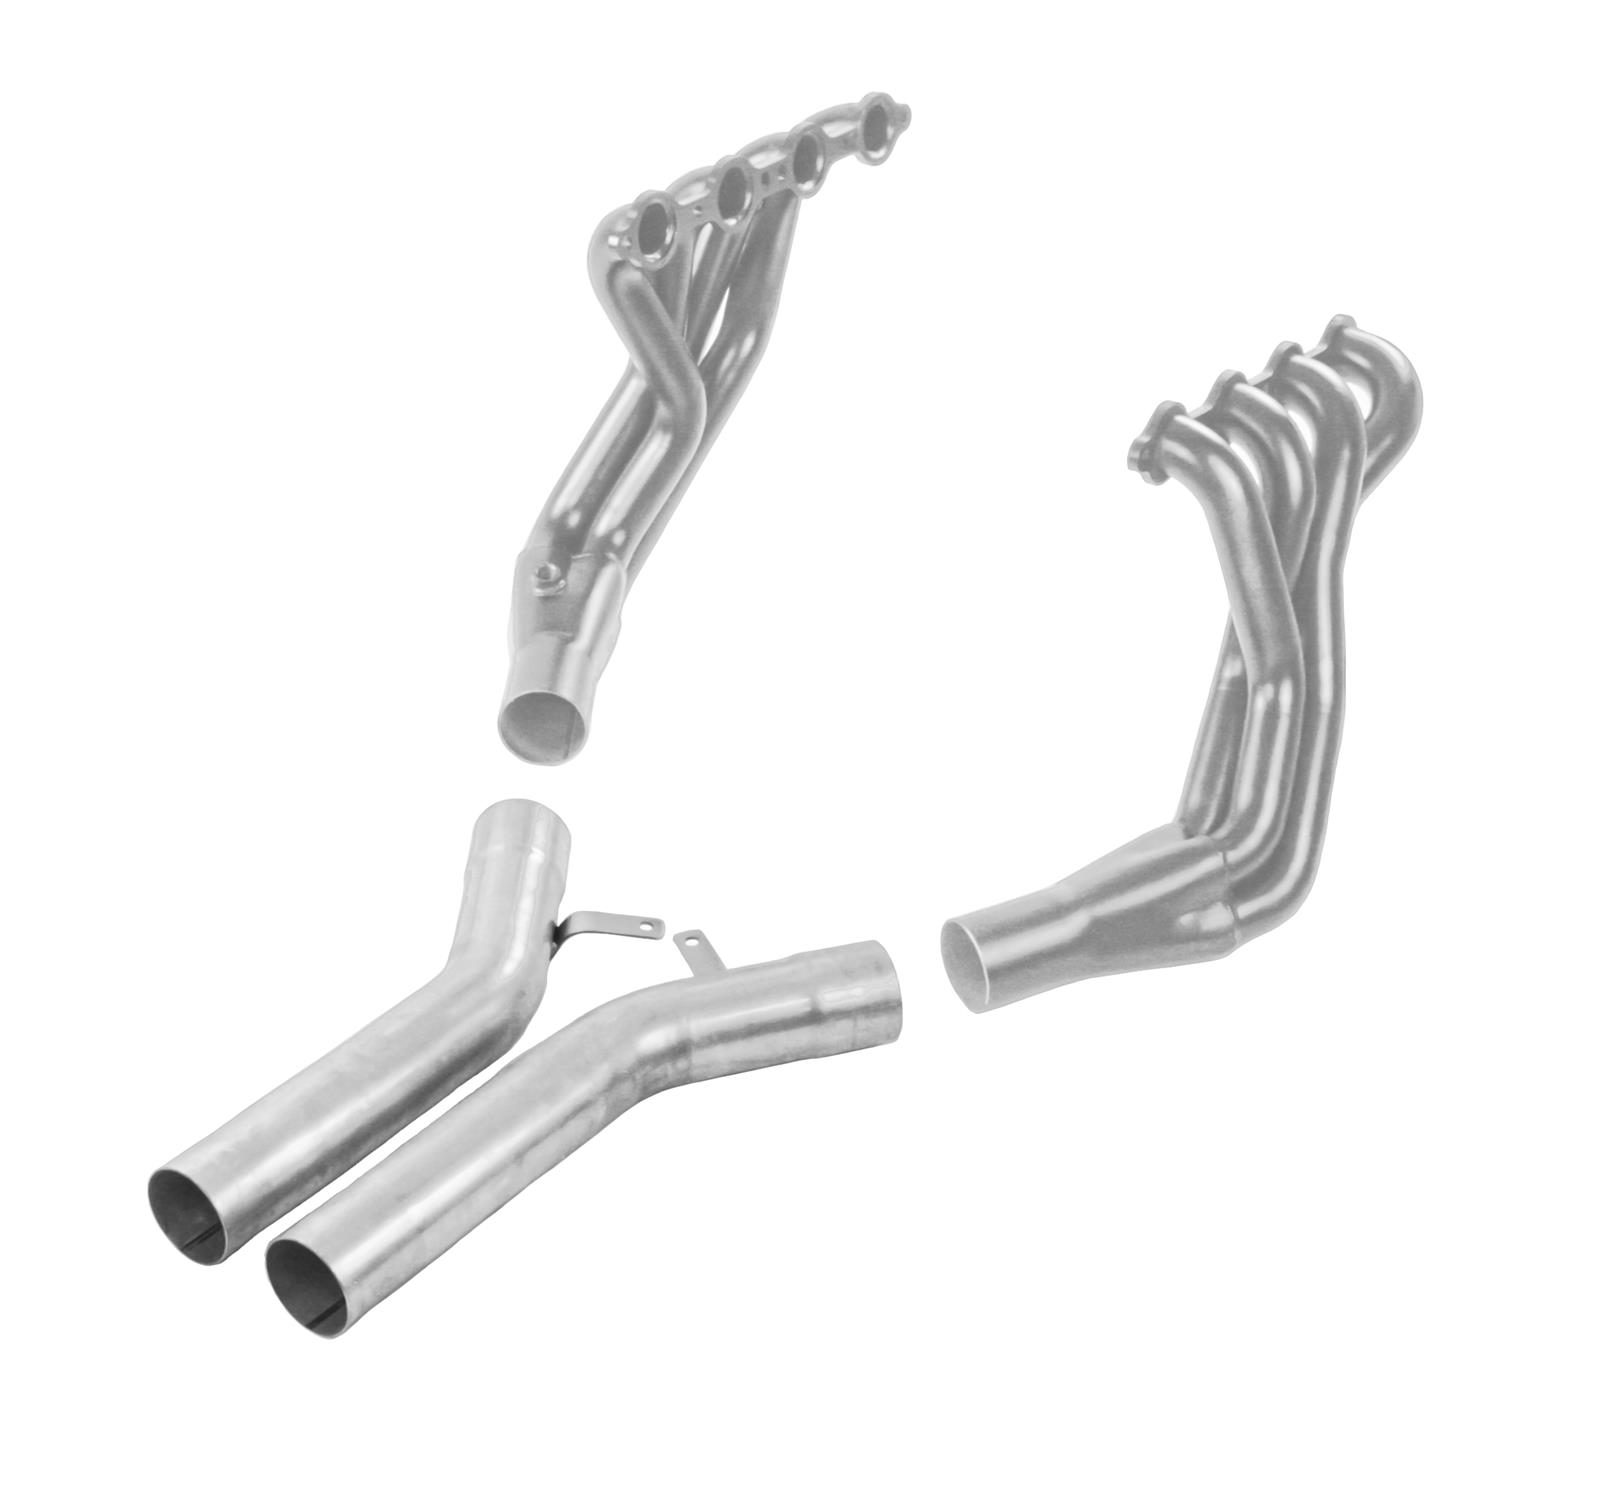 C6, C6/Z06 Corvette with the 6.0L, 6.2L & 7.0L PaceSetter Stainless Steel Long Tube Headers for 05-13